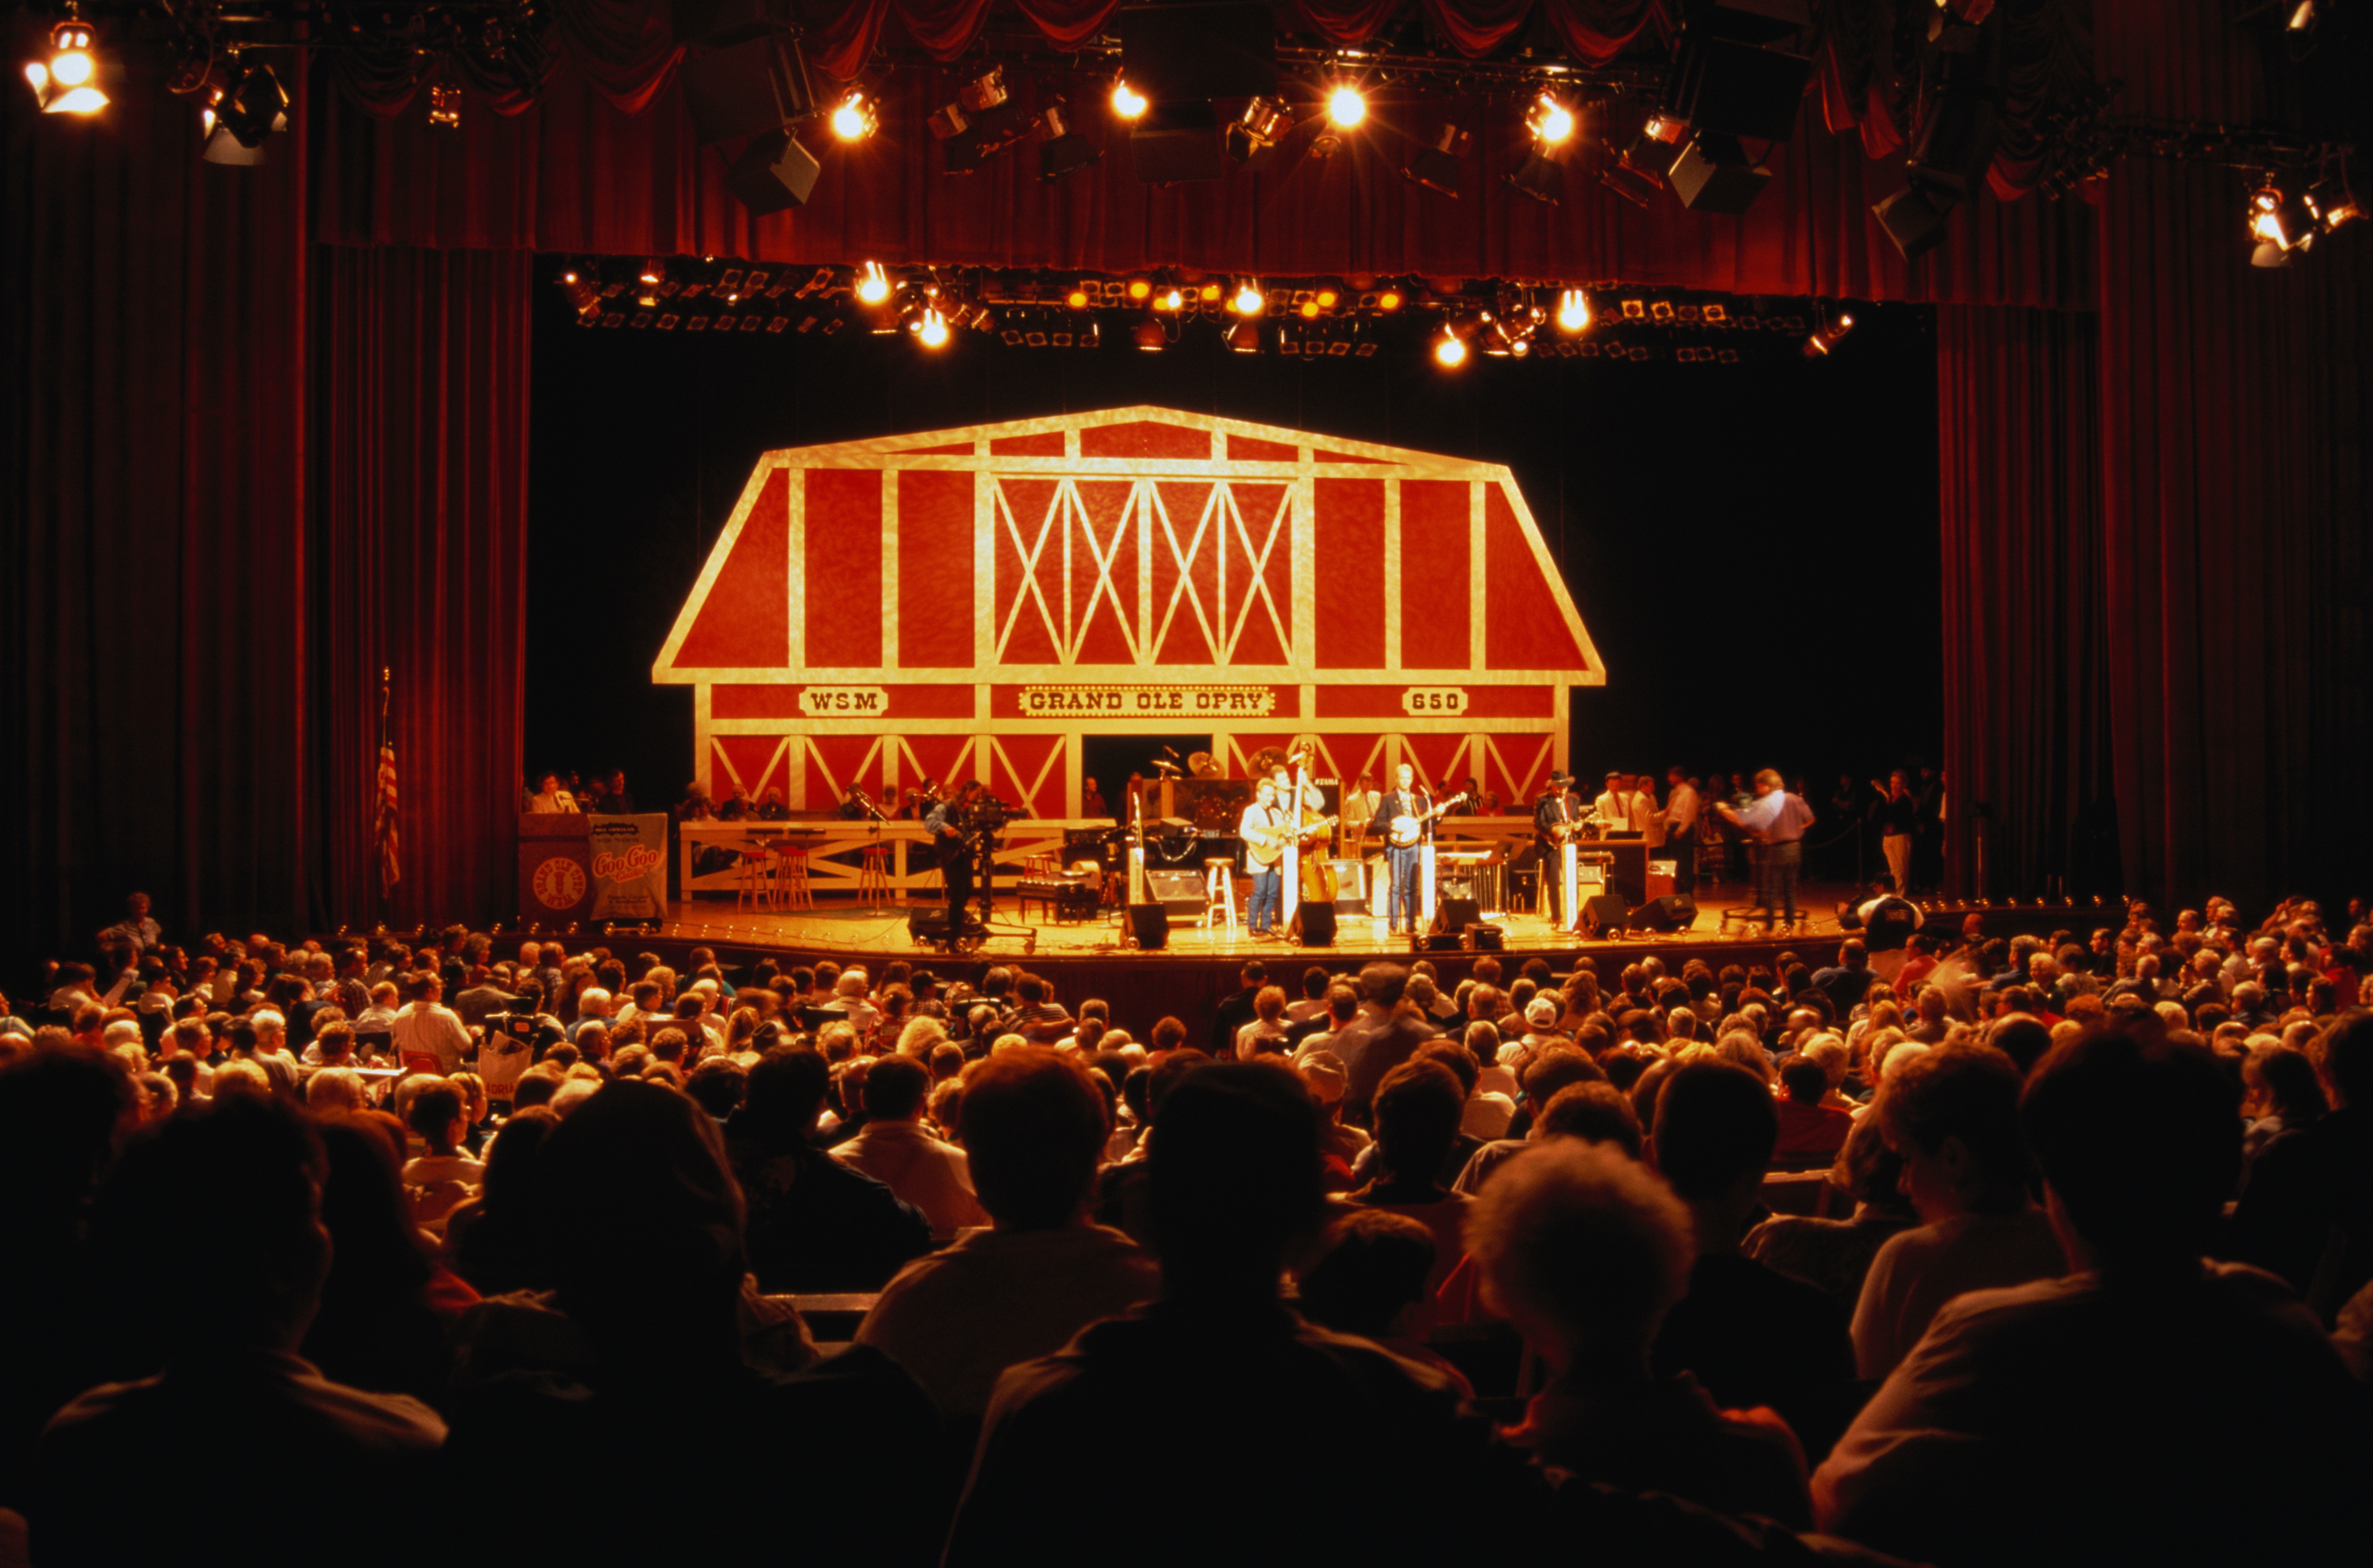 Grand Ole Opry Nashville, USA Entertainment Lonely